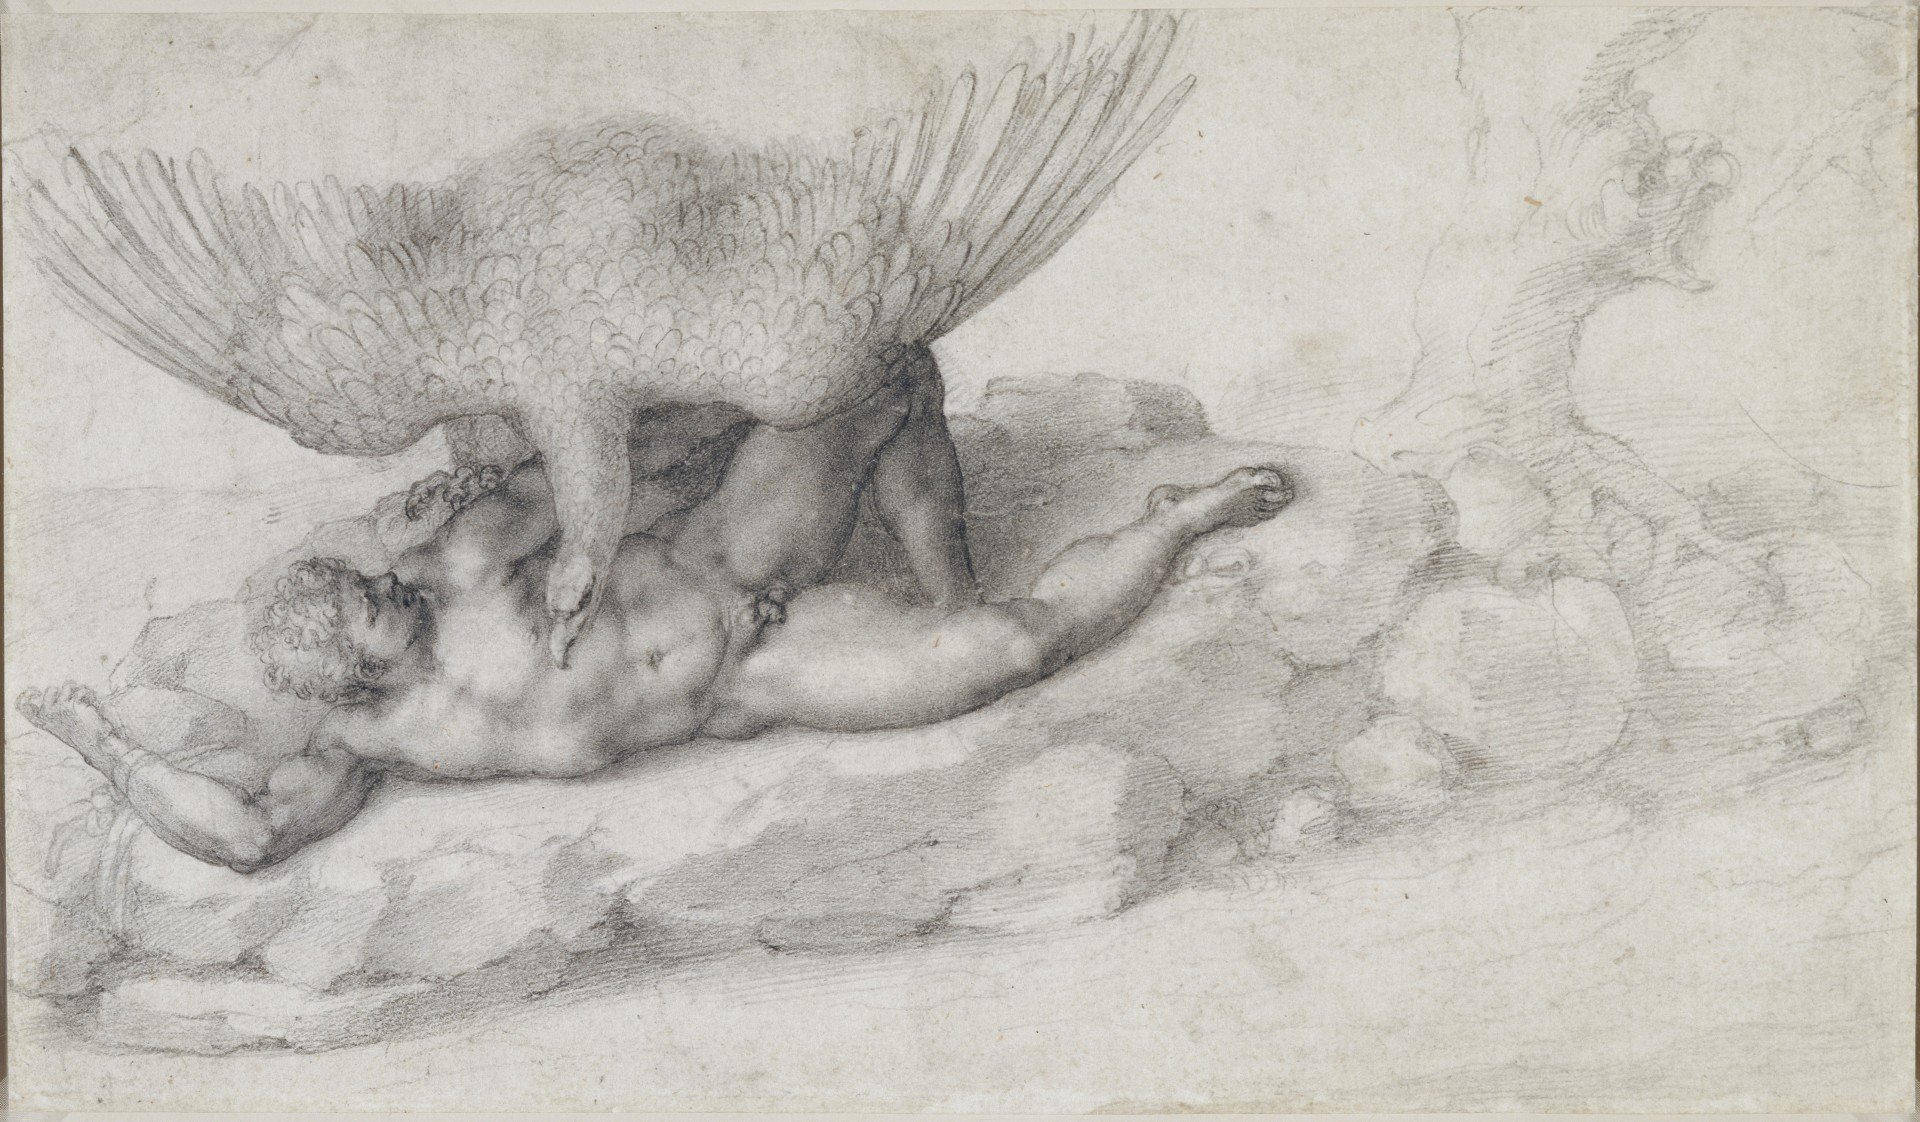 “Tityus”, Michelangelo Buonarroti, Charcoal and black chalk on paper, 33 x 19 cm, 1532, London, Royal Collection Trust / ©Her Majesty Queen Elizabeth II 2014